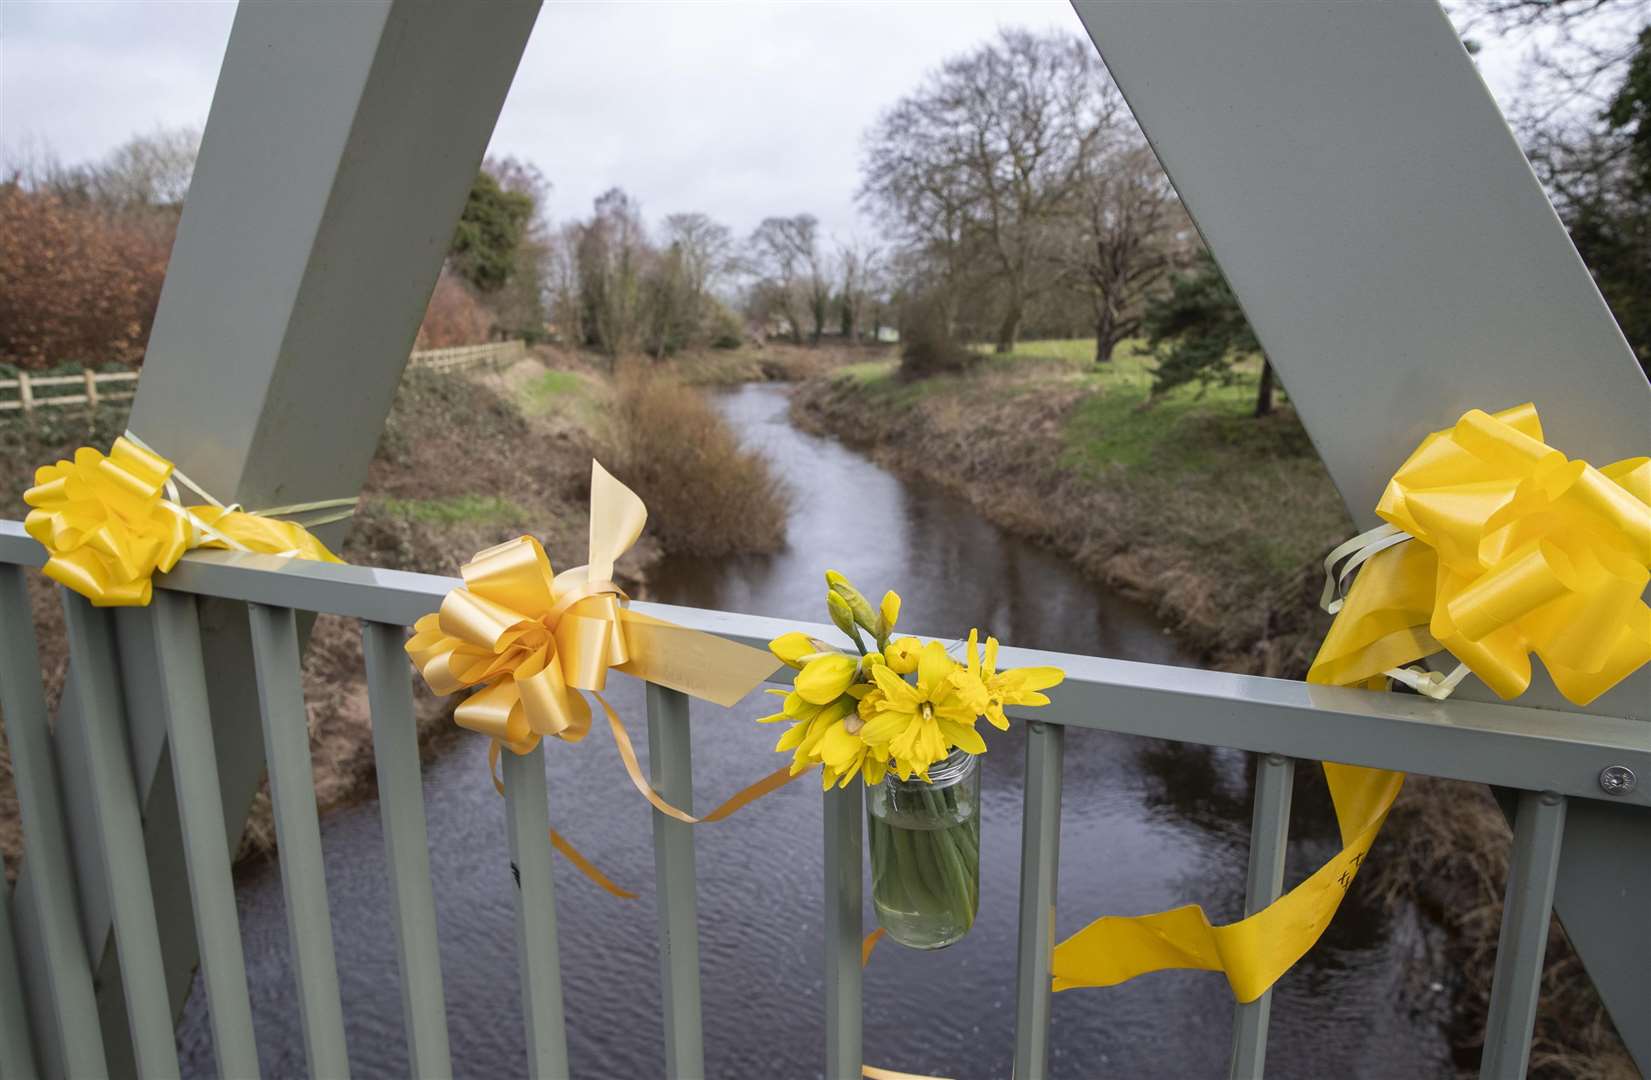 Flowers,and ribbons on a bridge over the River Wyre in St Michael’s (Jason Roberts/PA)